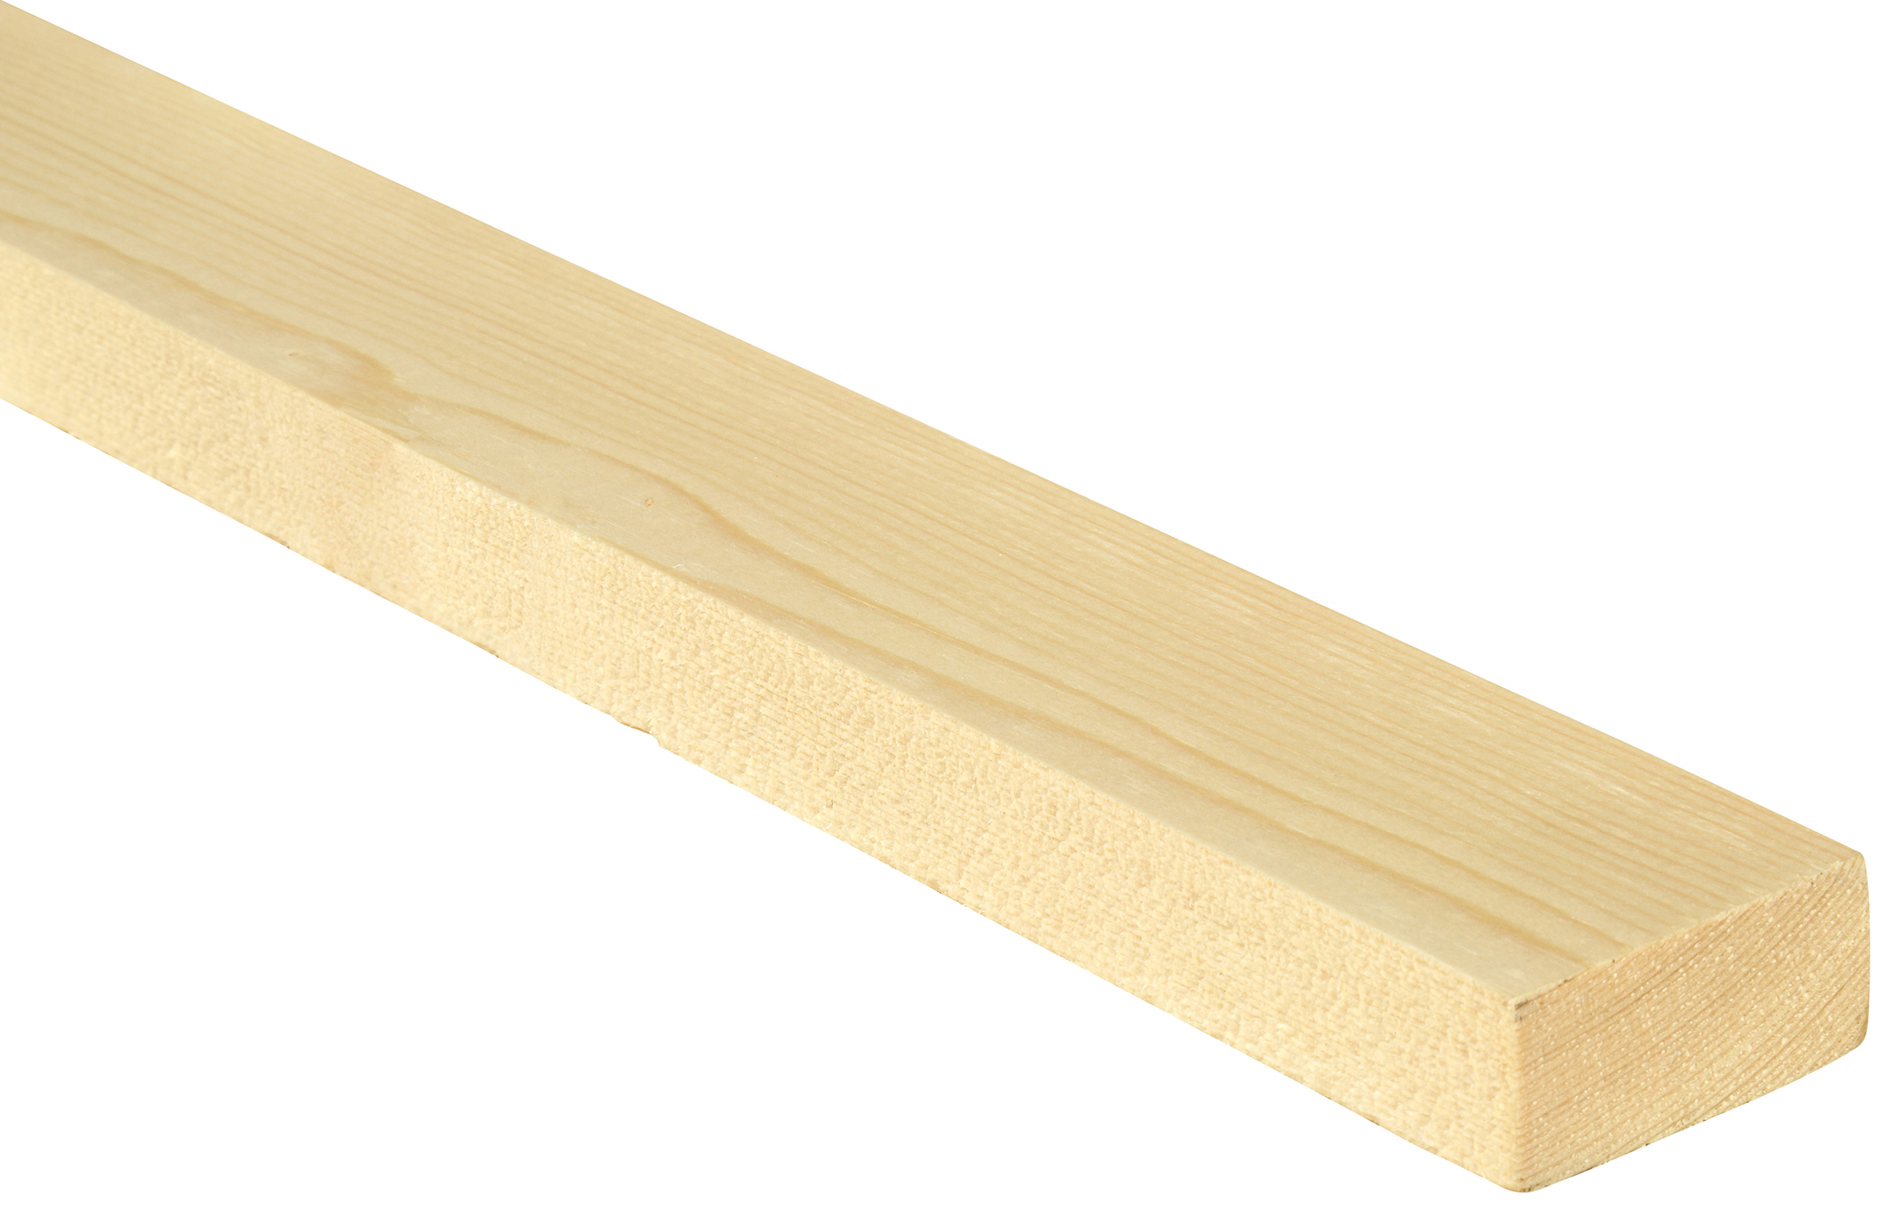 Wickes Treated Sawn Timber - 25 x 38 x 2400mm - Pack of 150